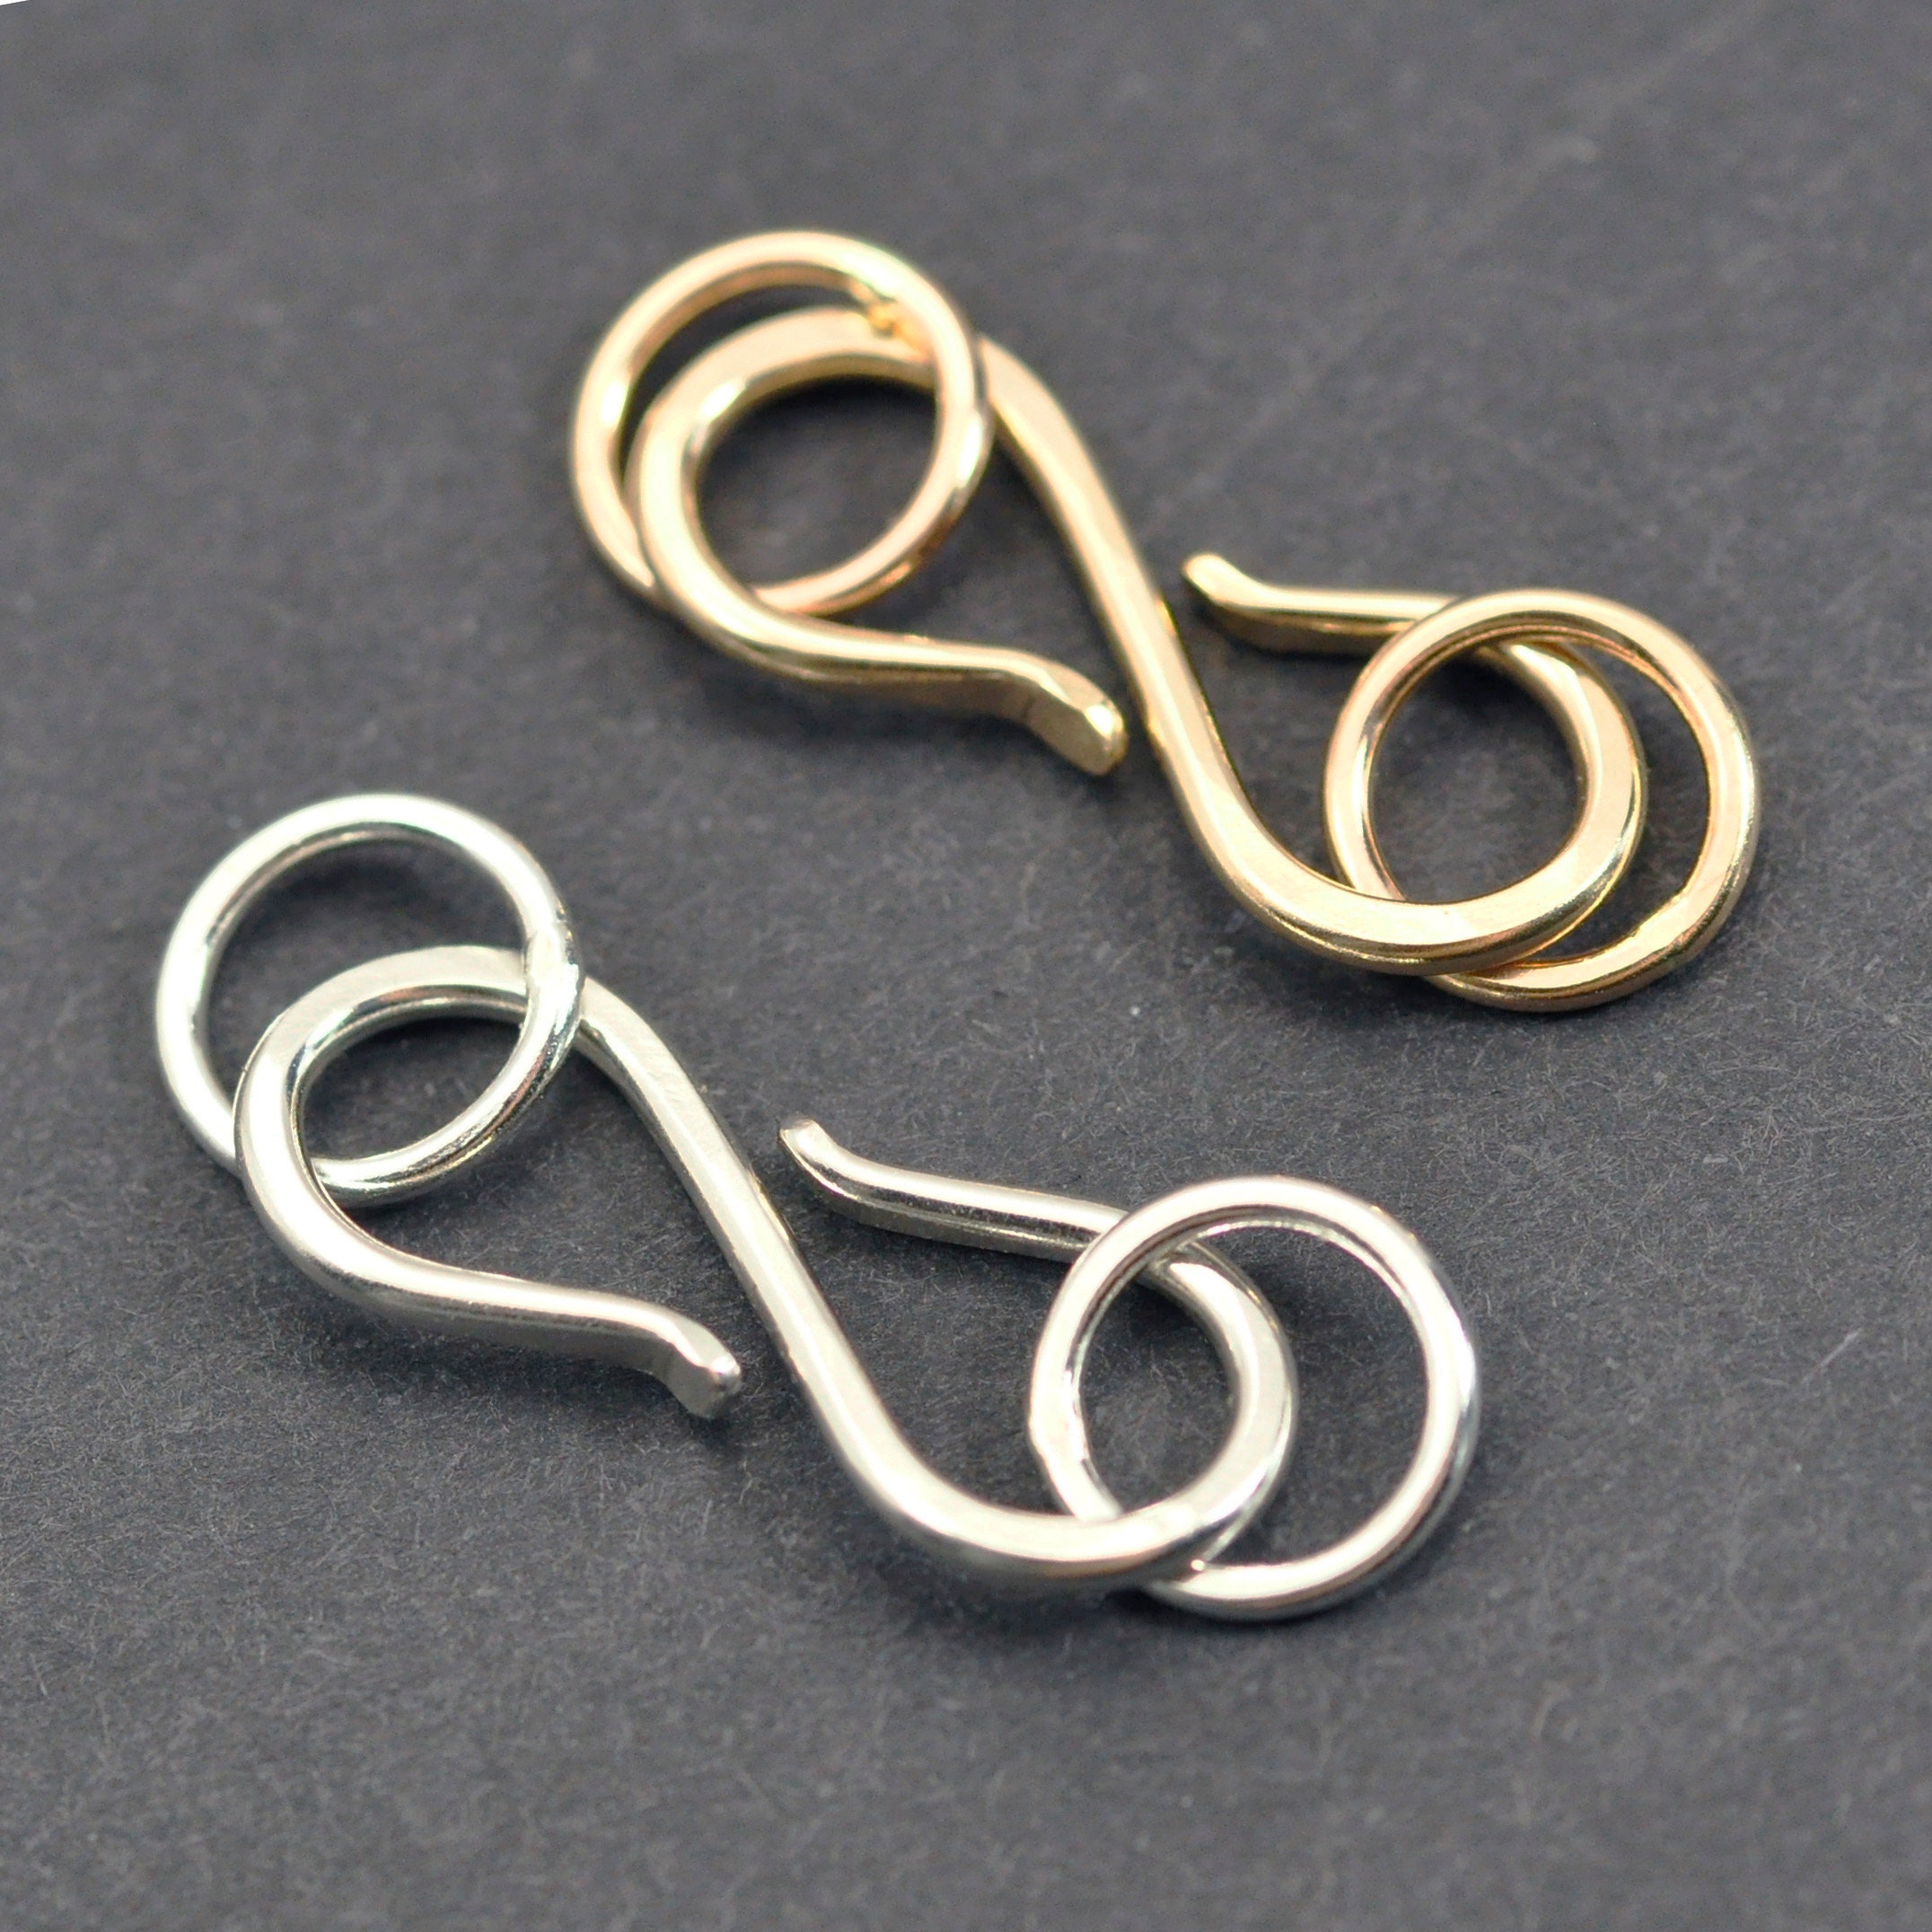 Handmade 14k Gold Filled or 925 Sterling Silver Small S Clasp - Etsy